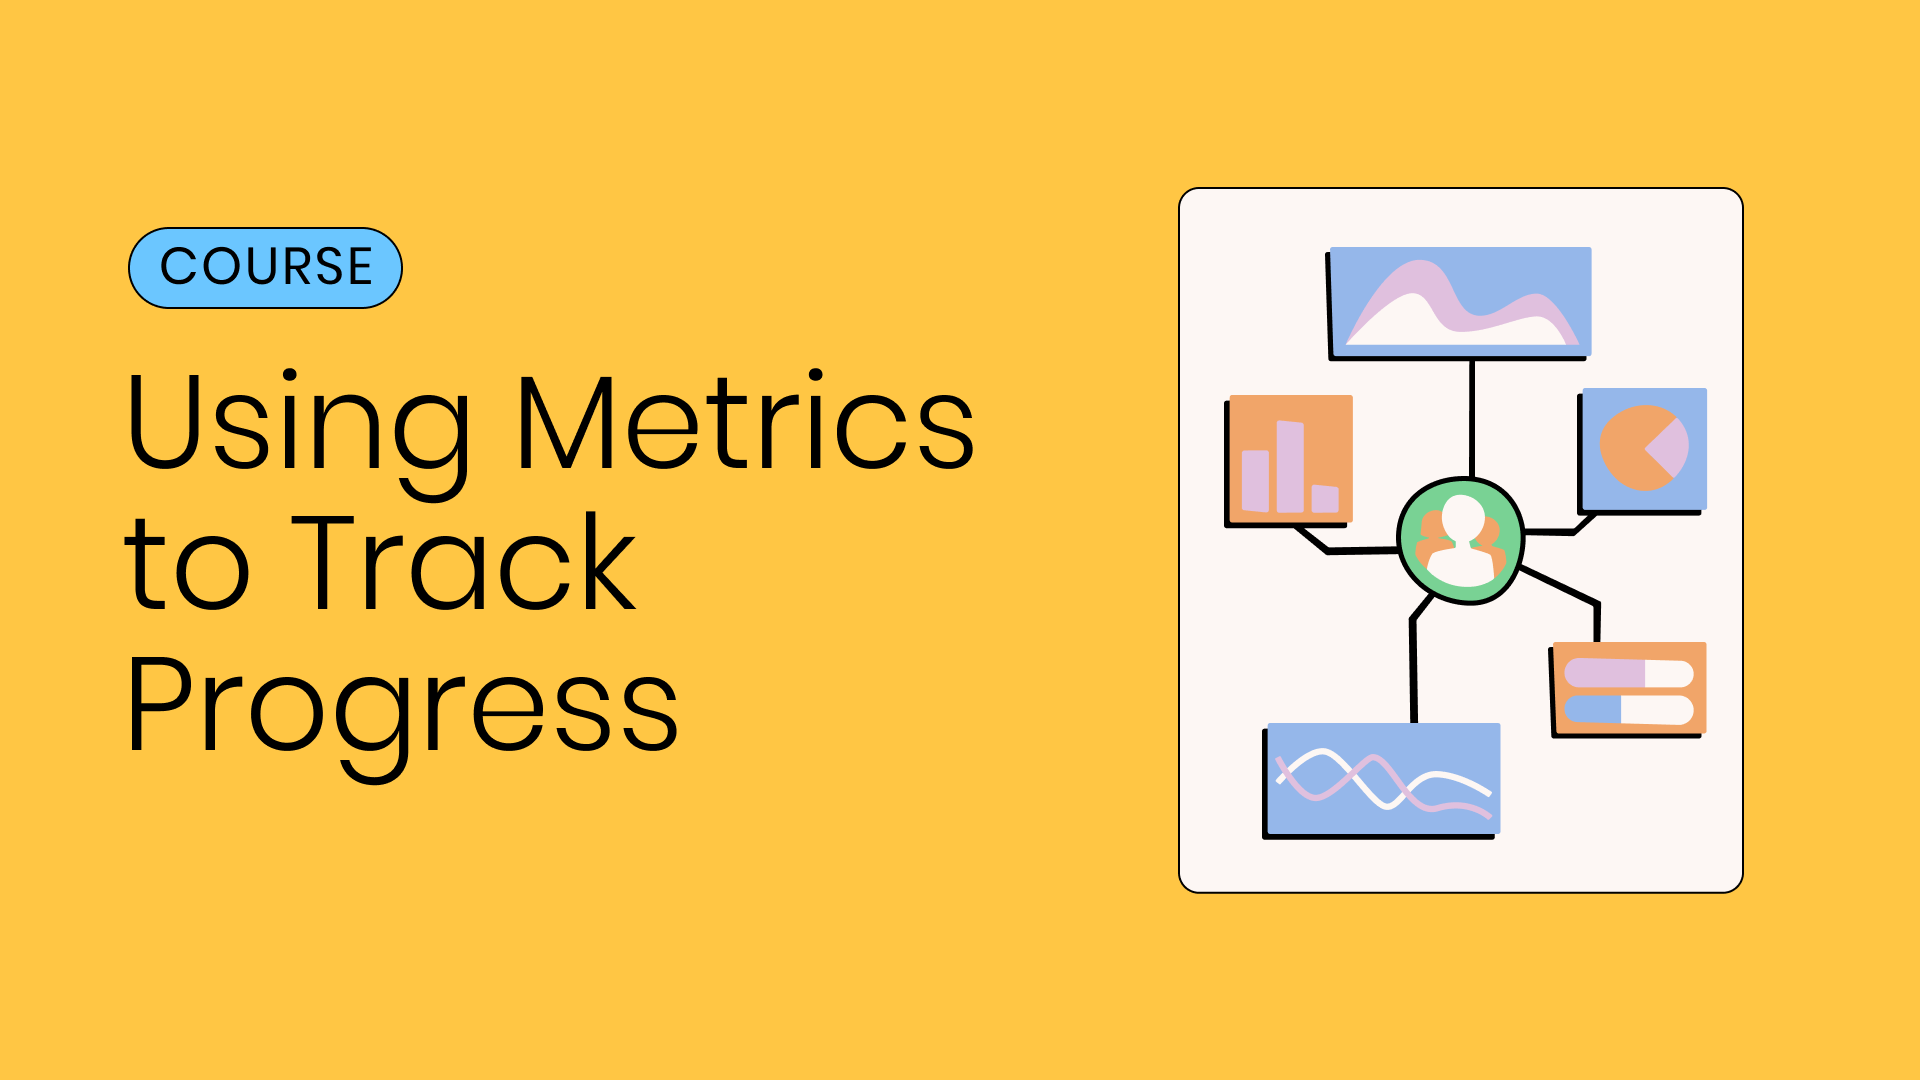 Graphic image of text referring to the course title "Using Metrics to Track Progress" on social media. 